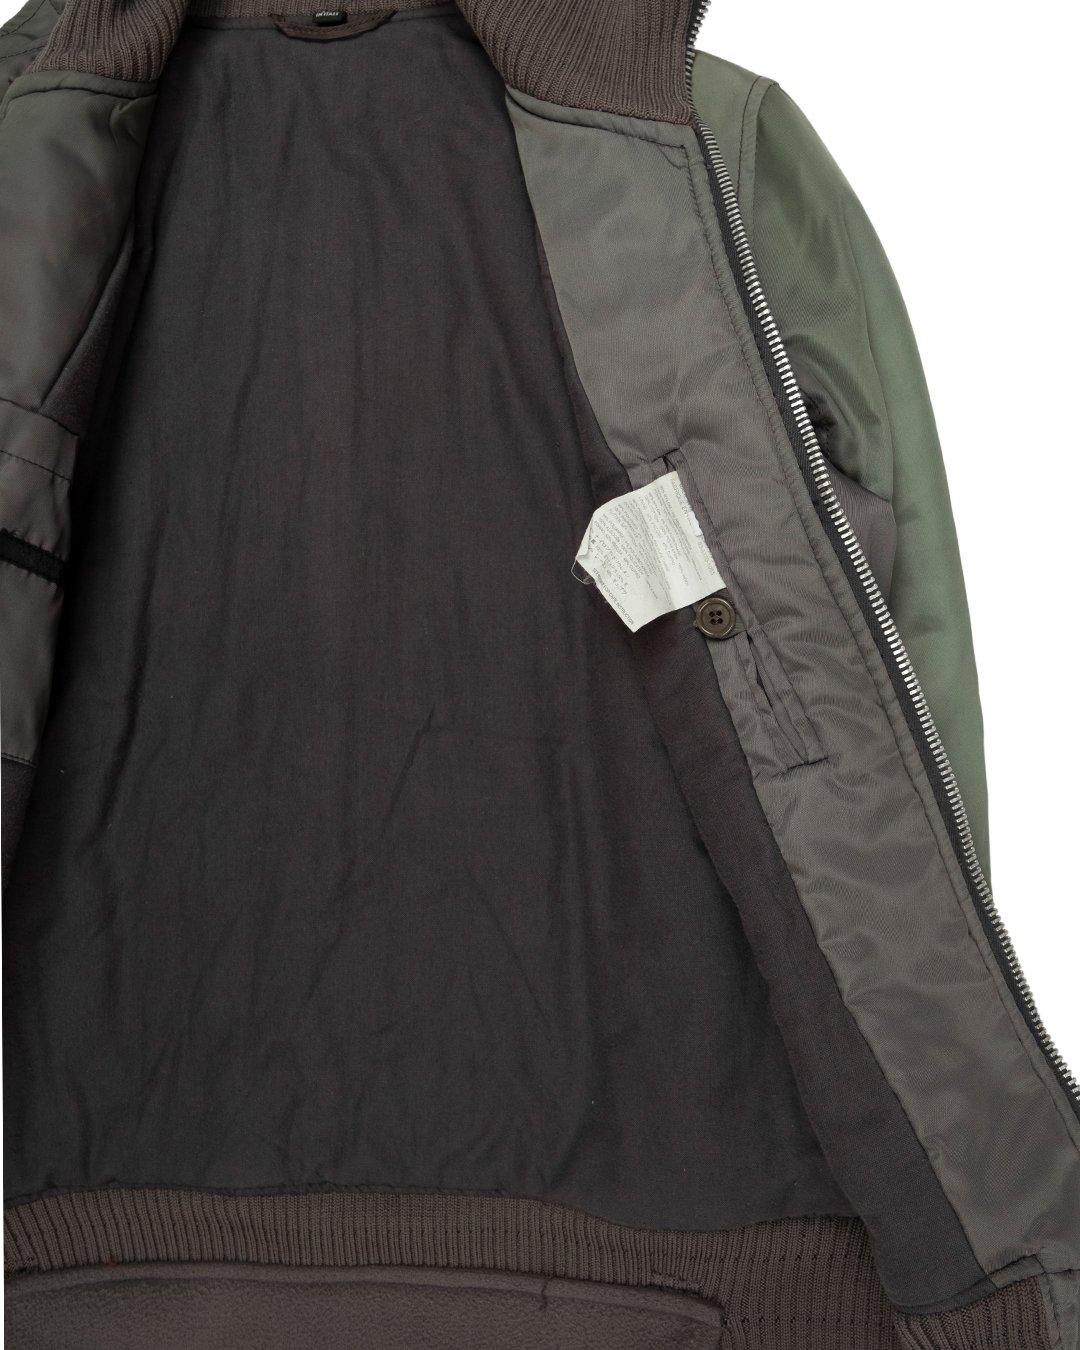 Helmut Lang AW2003 Iridescent Skirted Bondage Bomber In Excellent Condition For Sale In Beverly Hills, CA